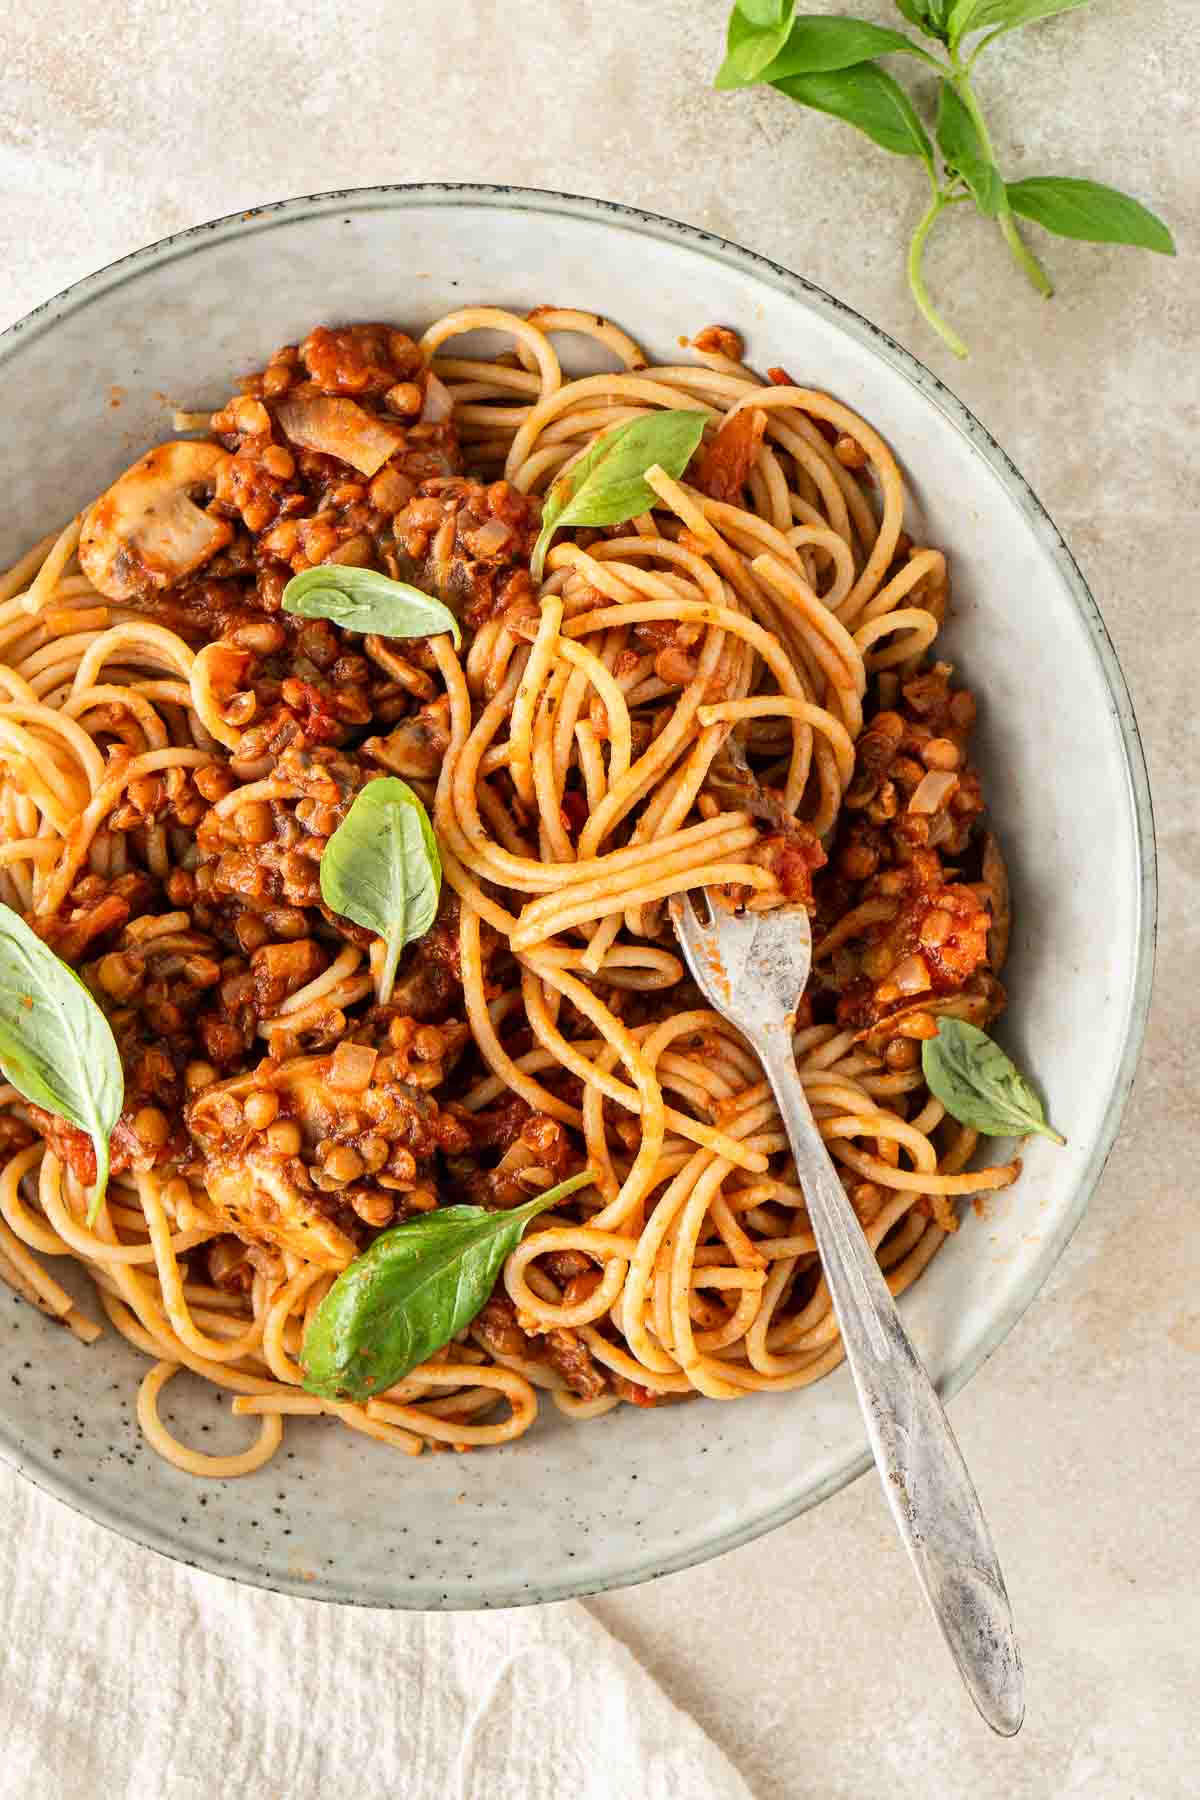 Bolognese mixed with the spaghetti in a bowl with a fork.